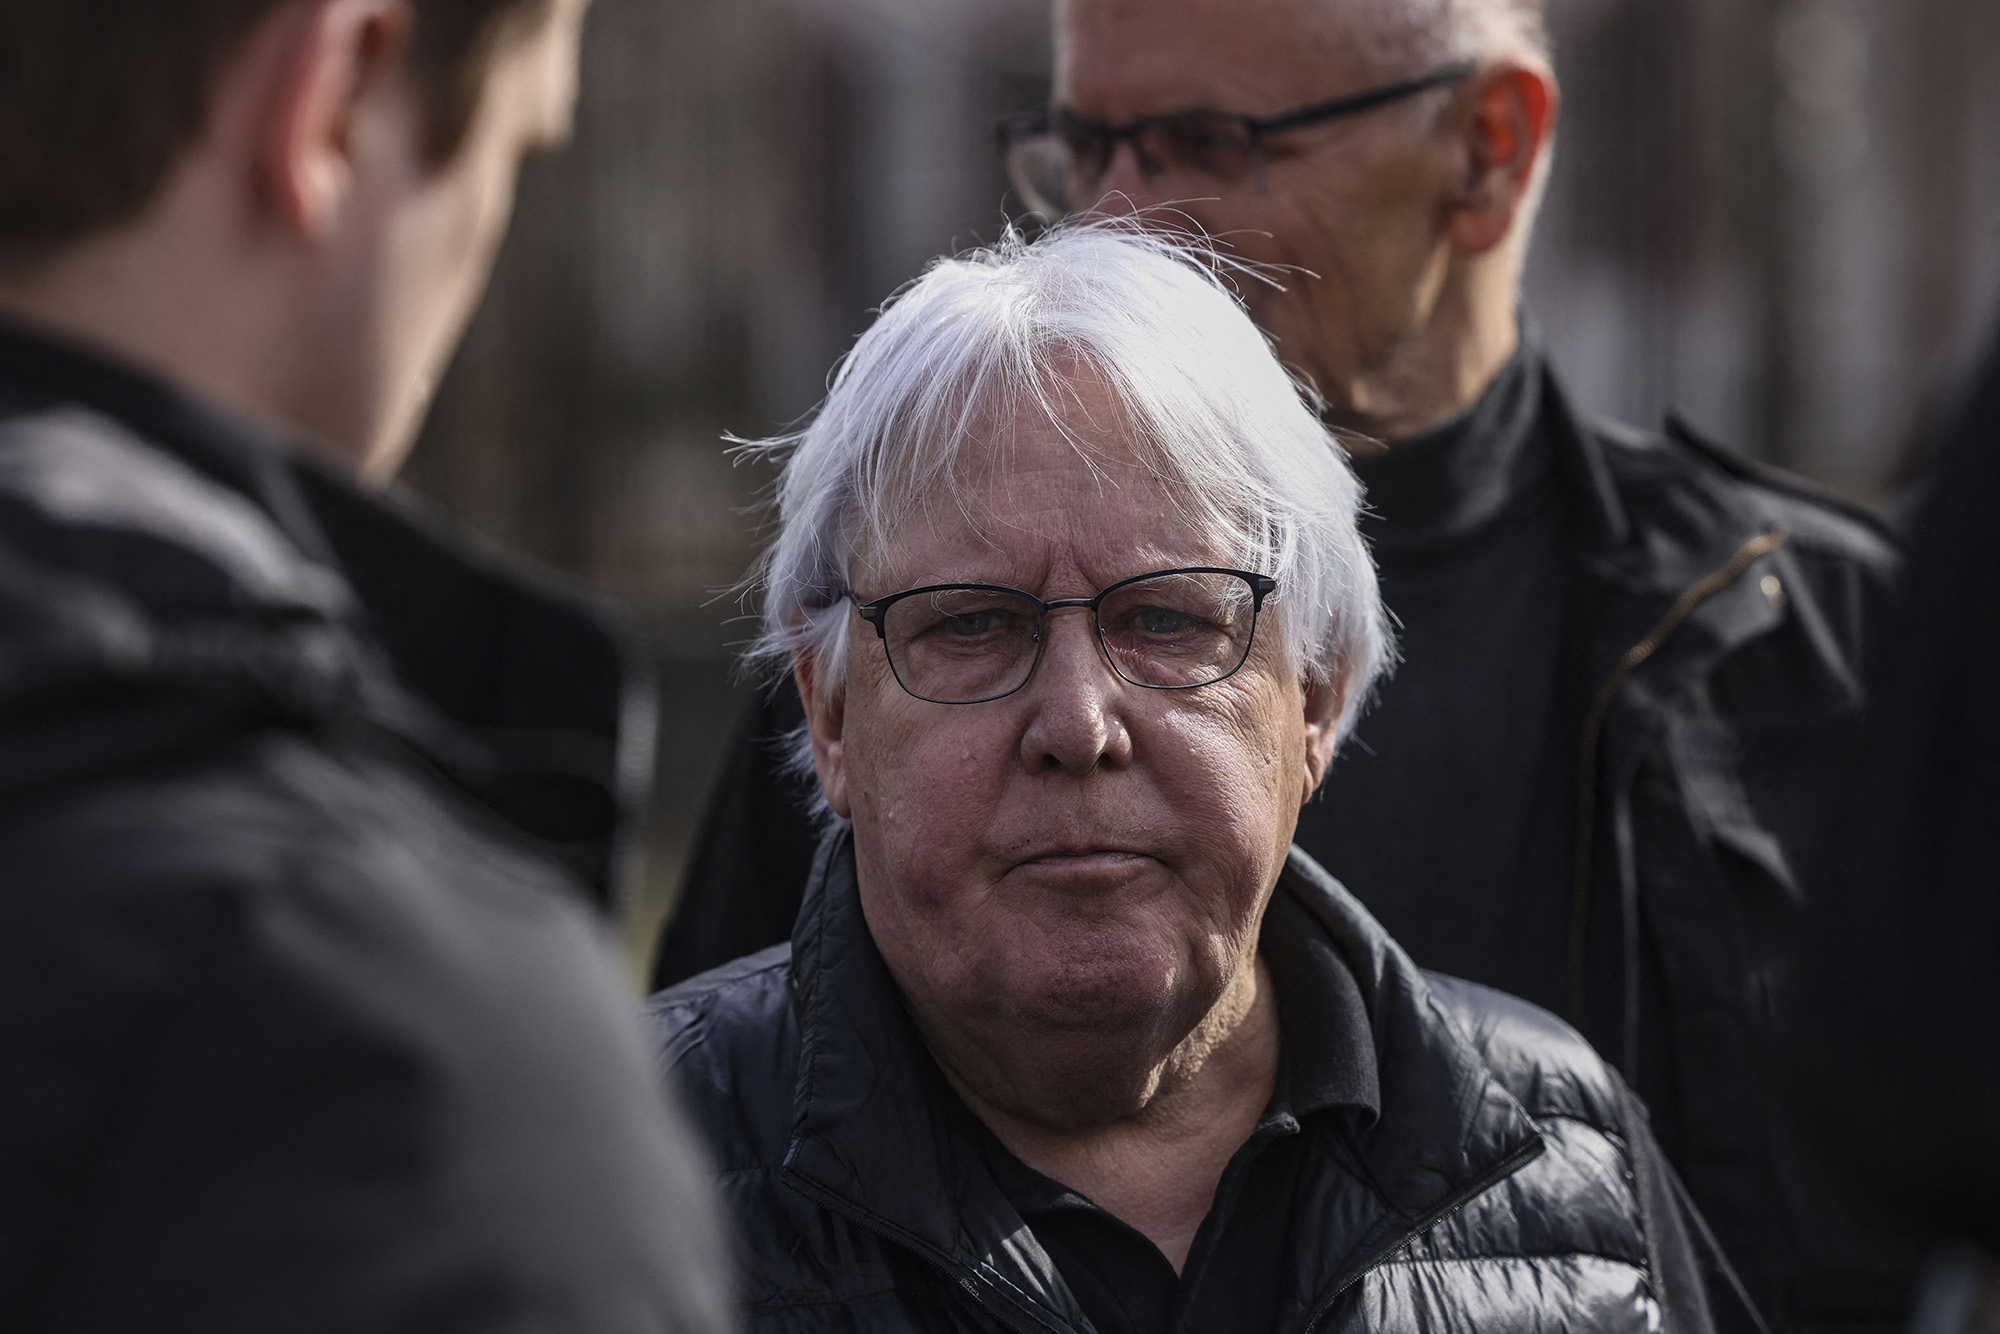 UN humanitarian chief Martin Griffiths, center, pictured during a visit to Bucha, Ukraine, on April 7, after he had previously visited Moscow.